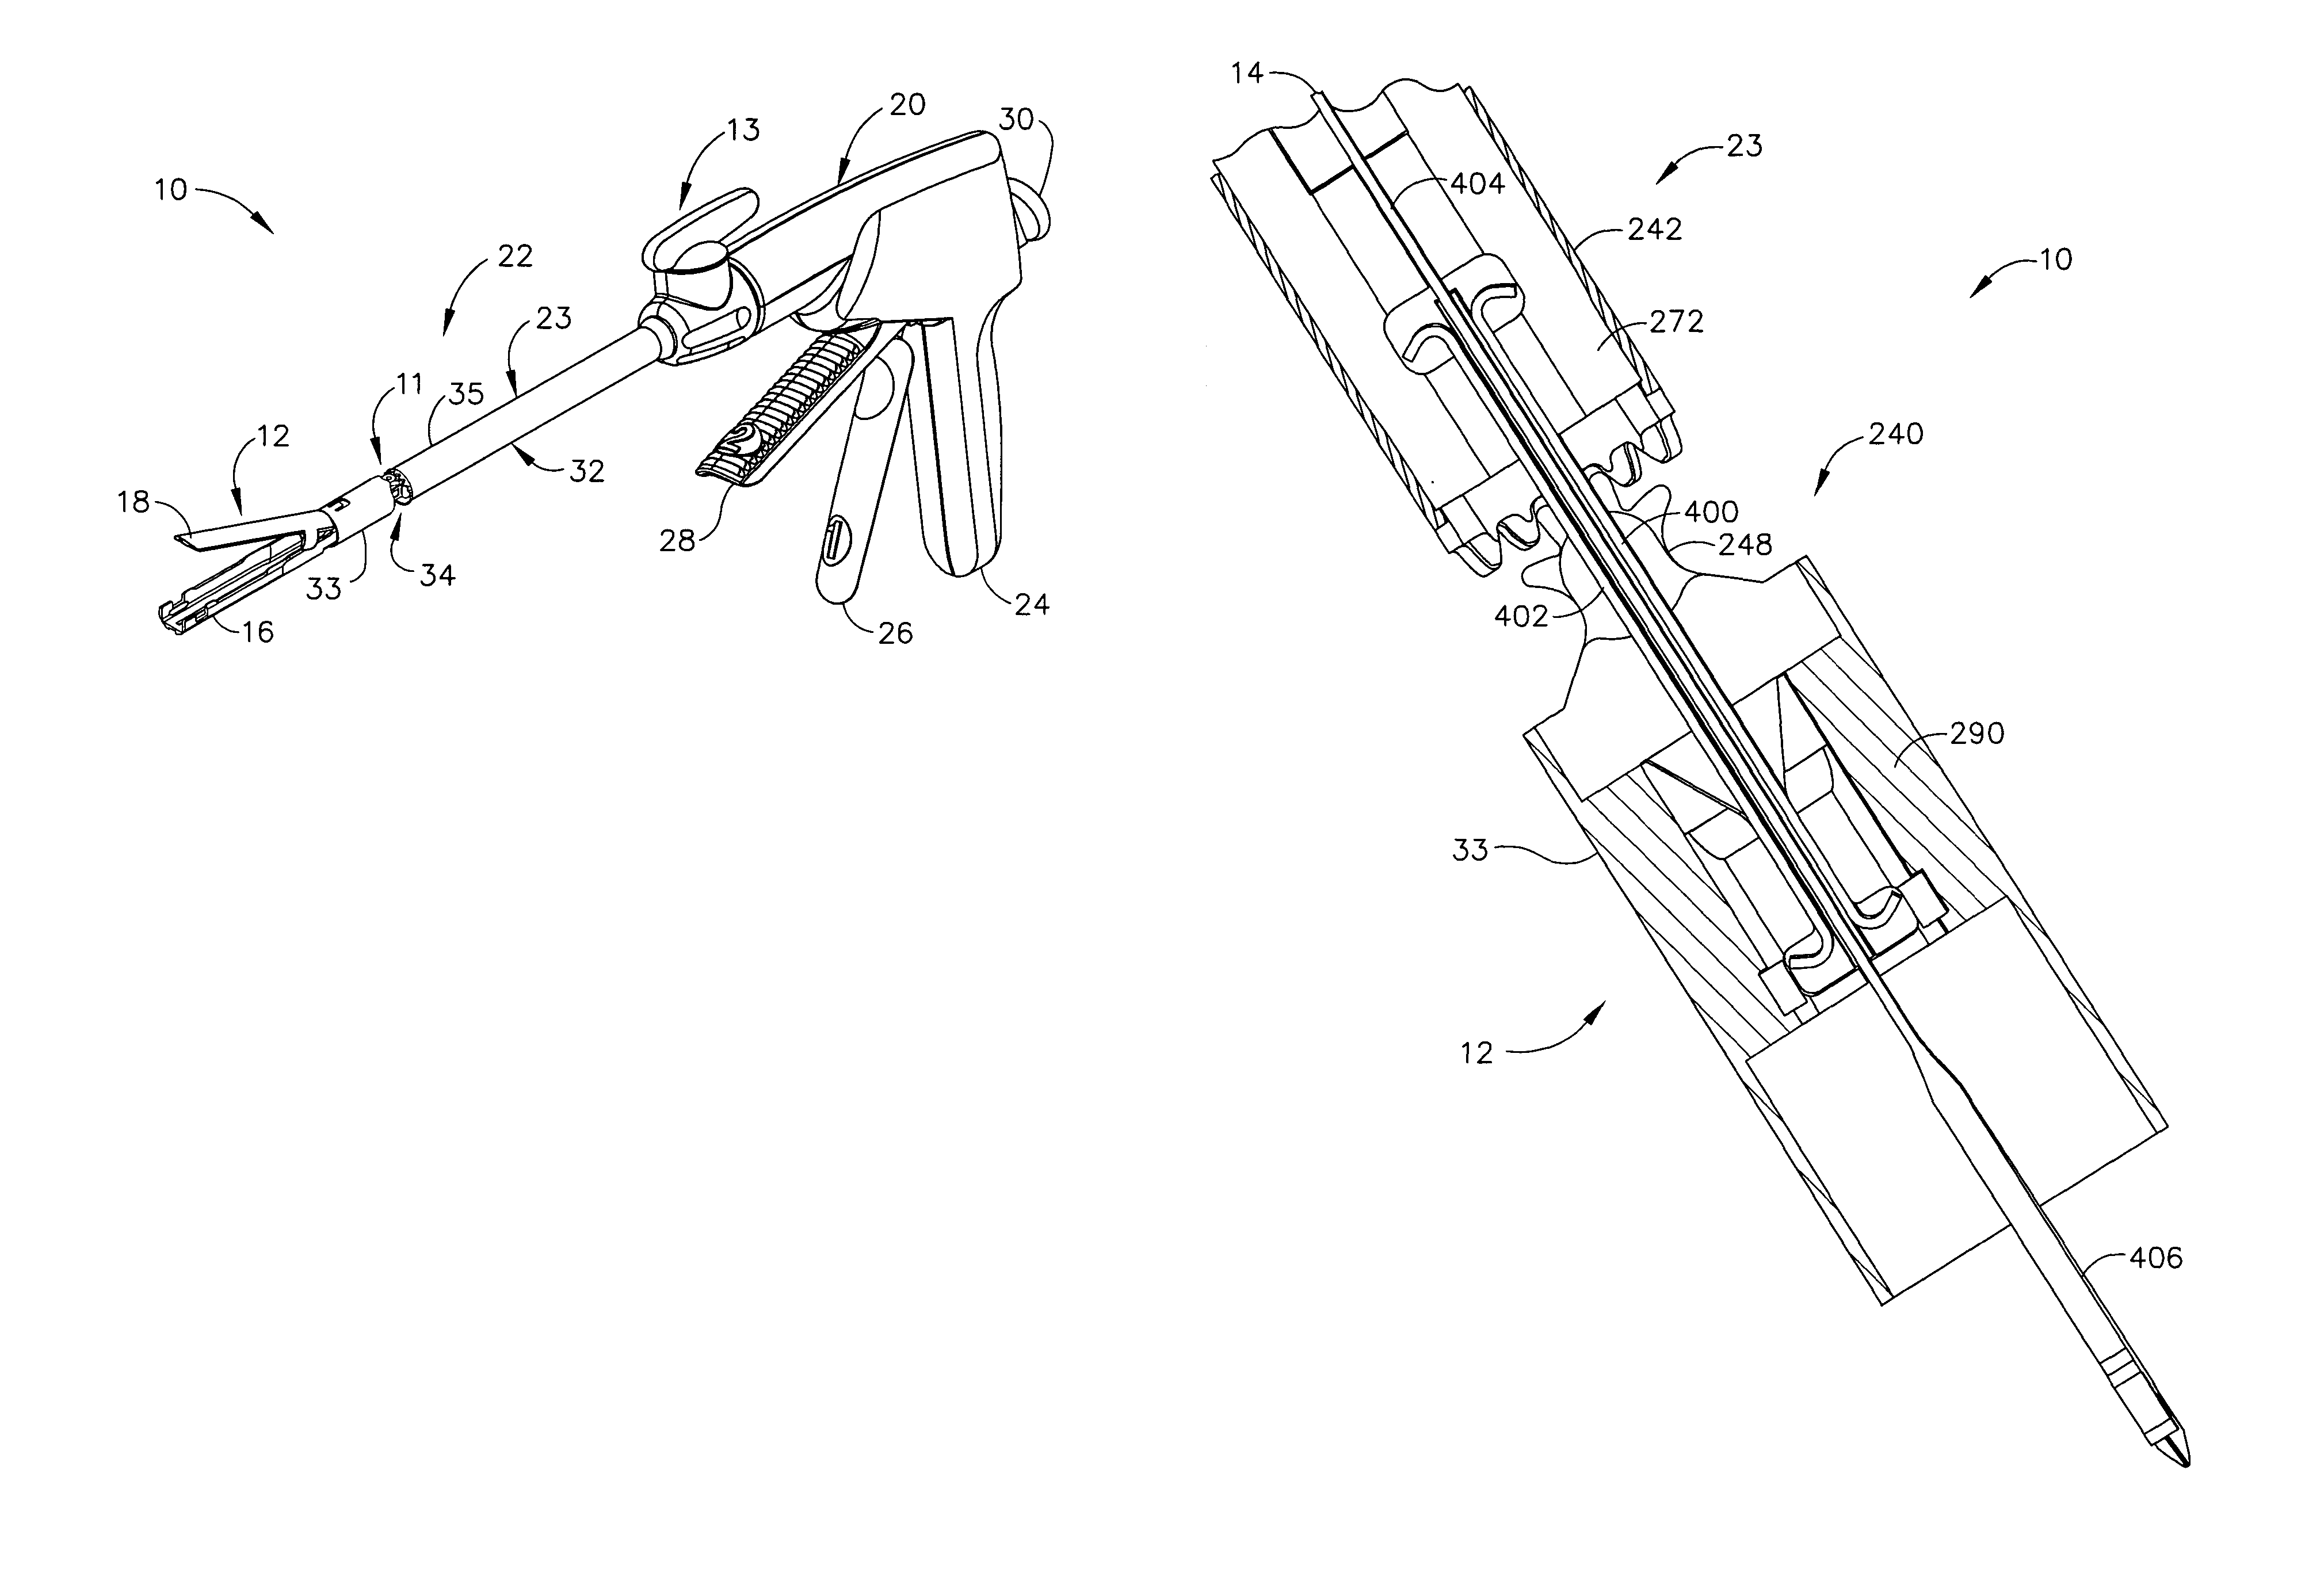 Surgical stapling instrument incorporating a tapered firing bar for increased flexibility around the articulation joint